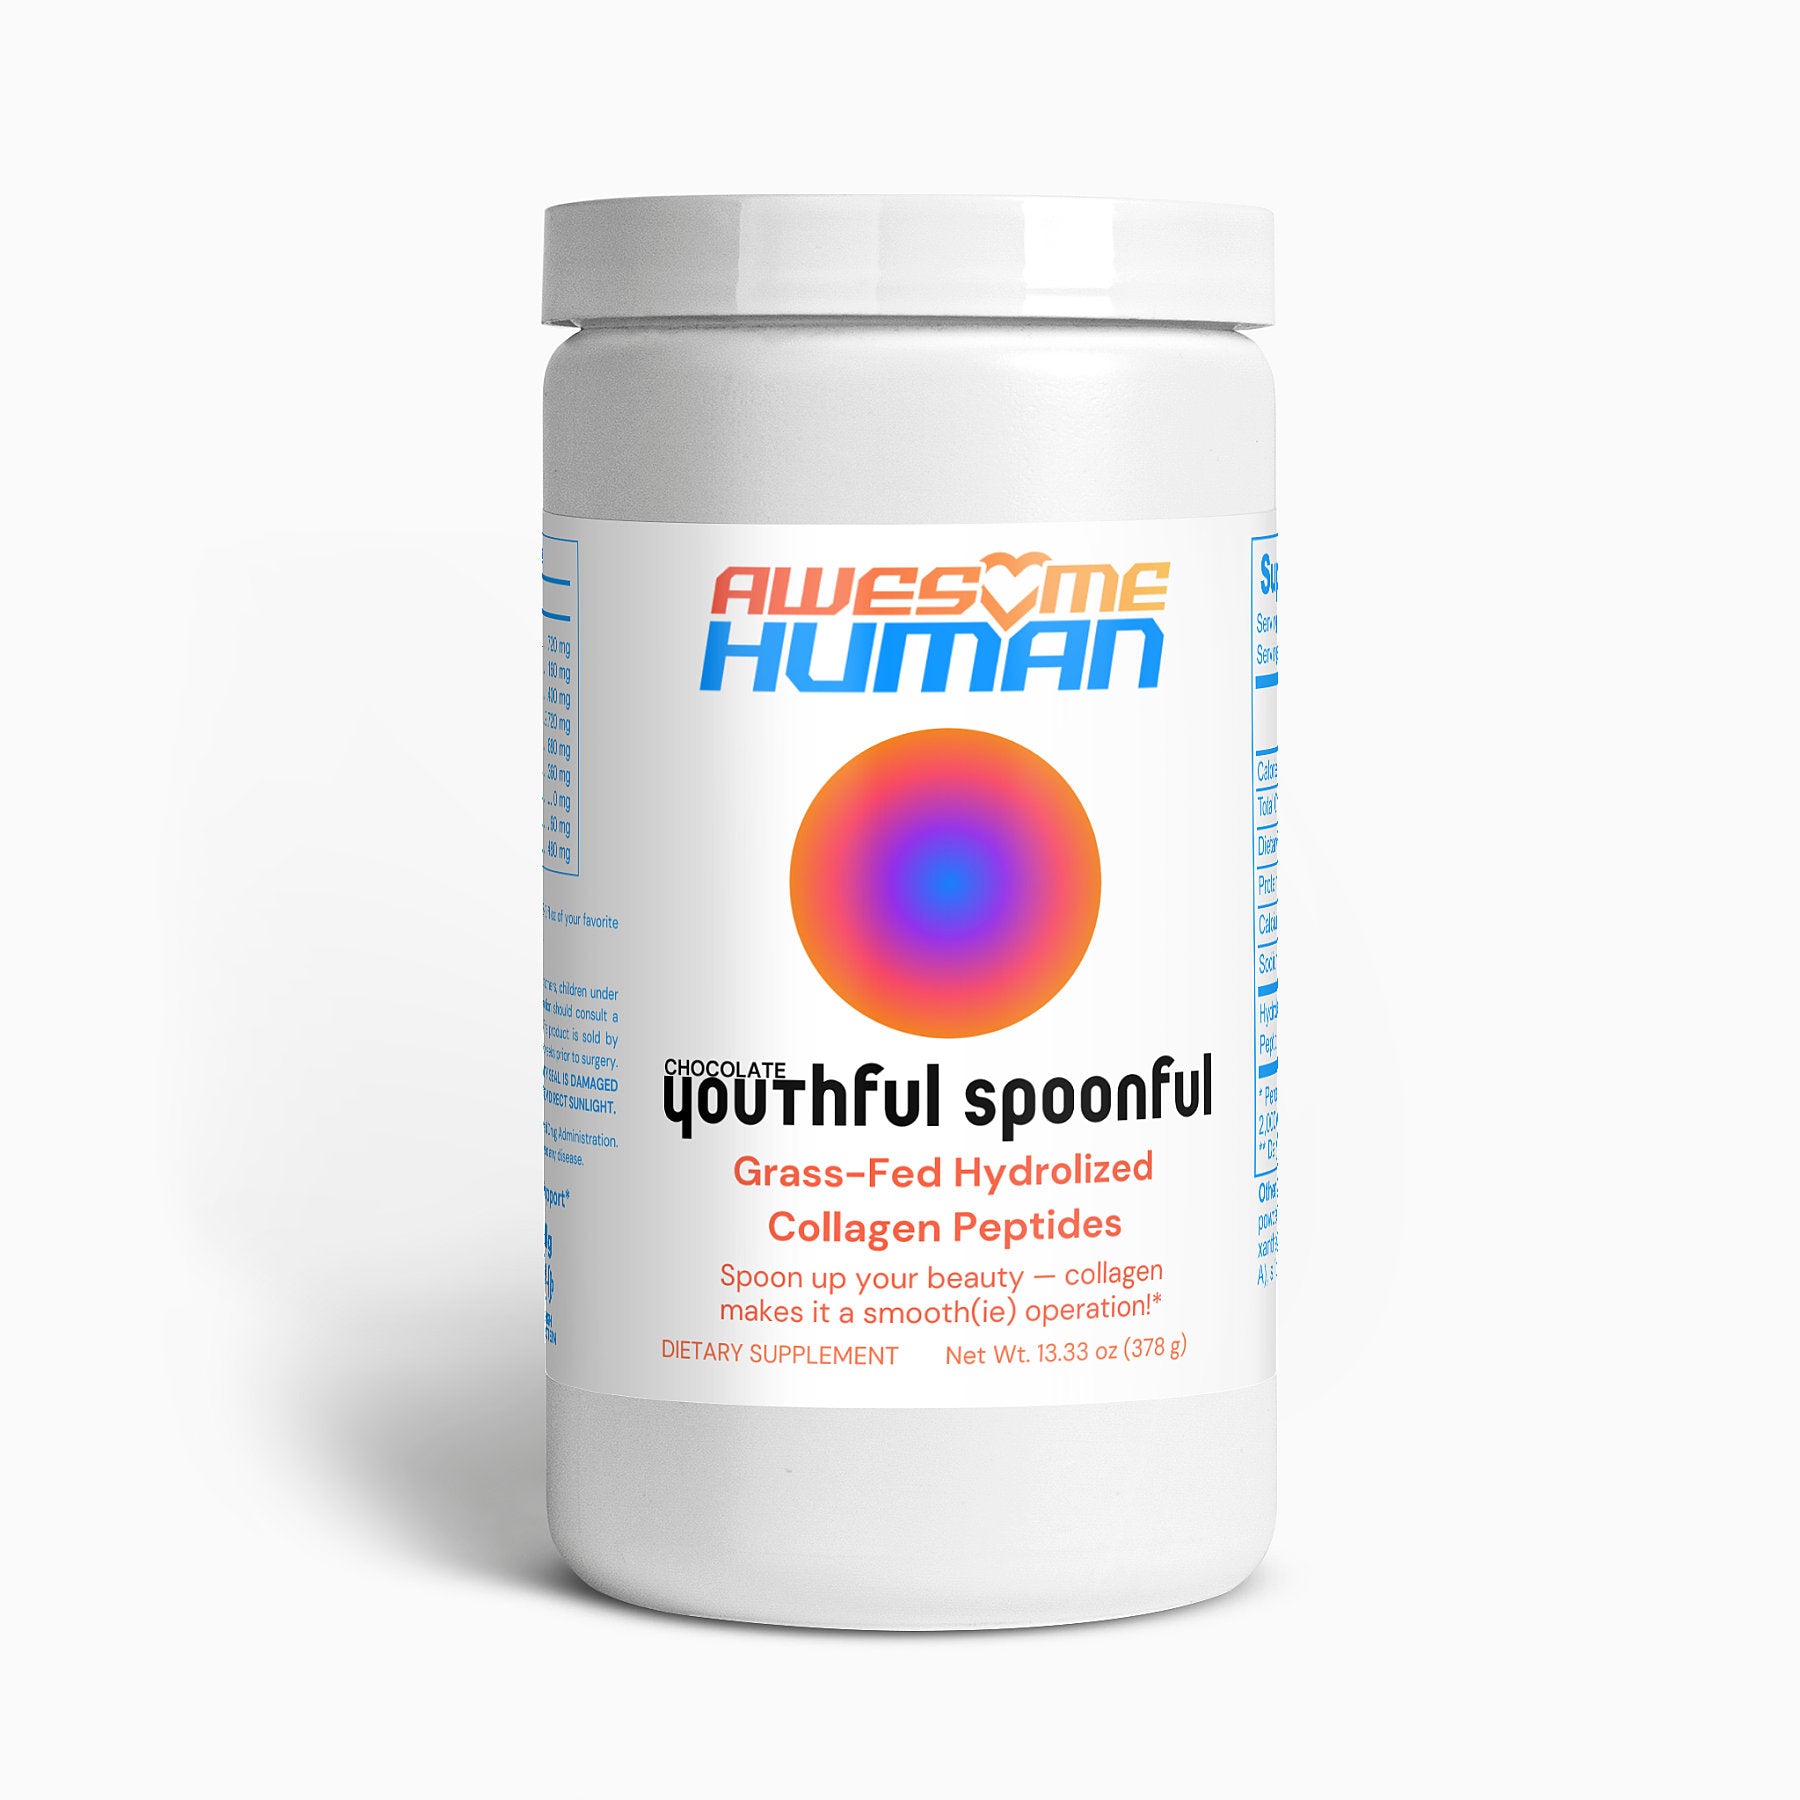 Youthful Spoonfull Chocolate | Hydrolized Collagen Peptides